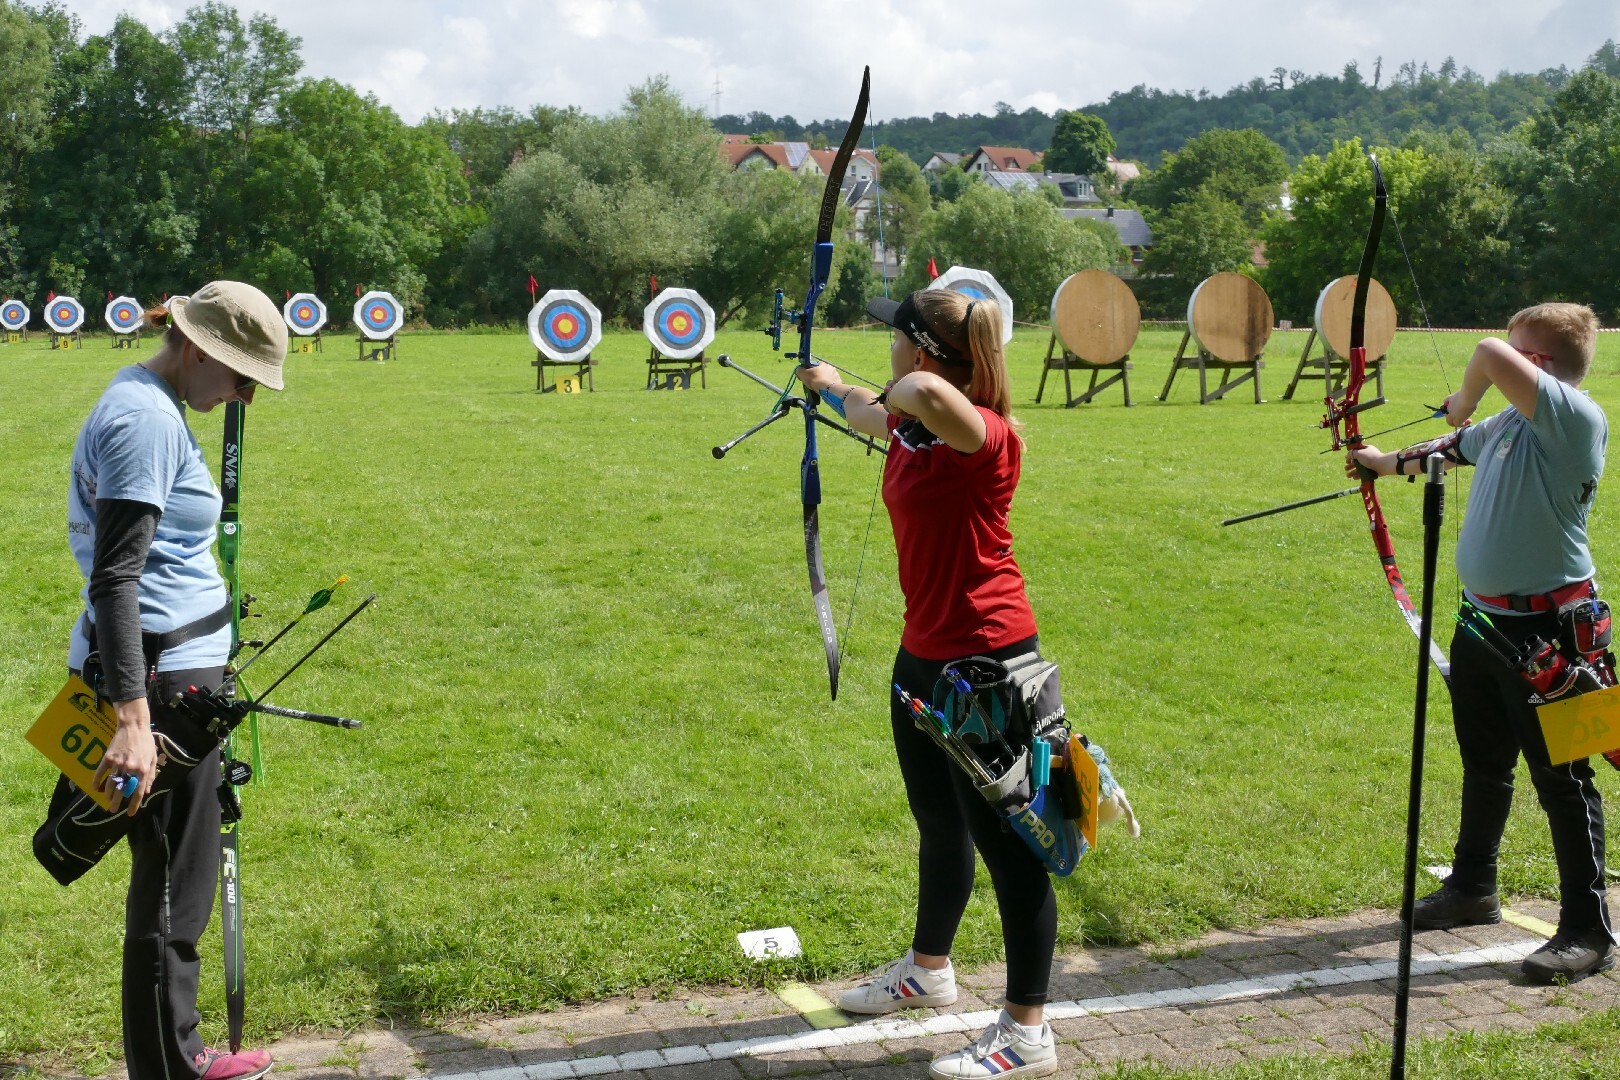 Three archers shooting at an outdoor competition